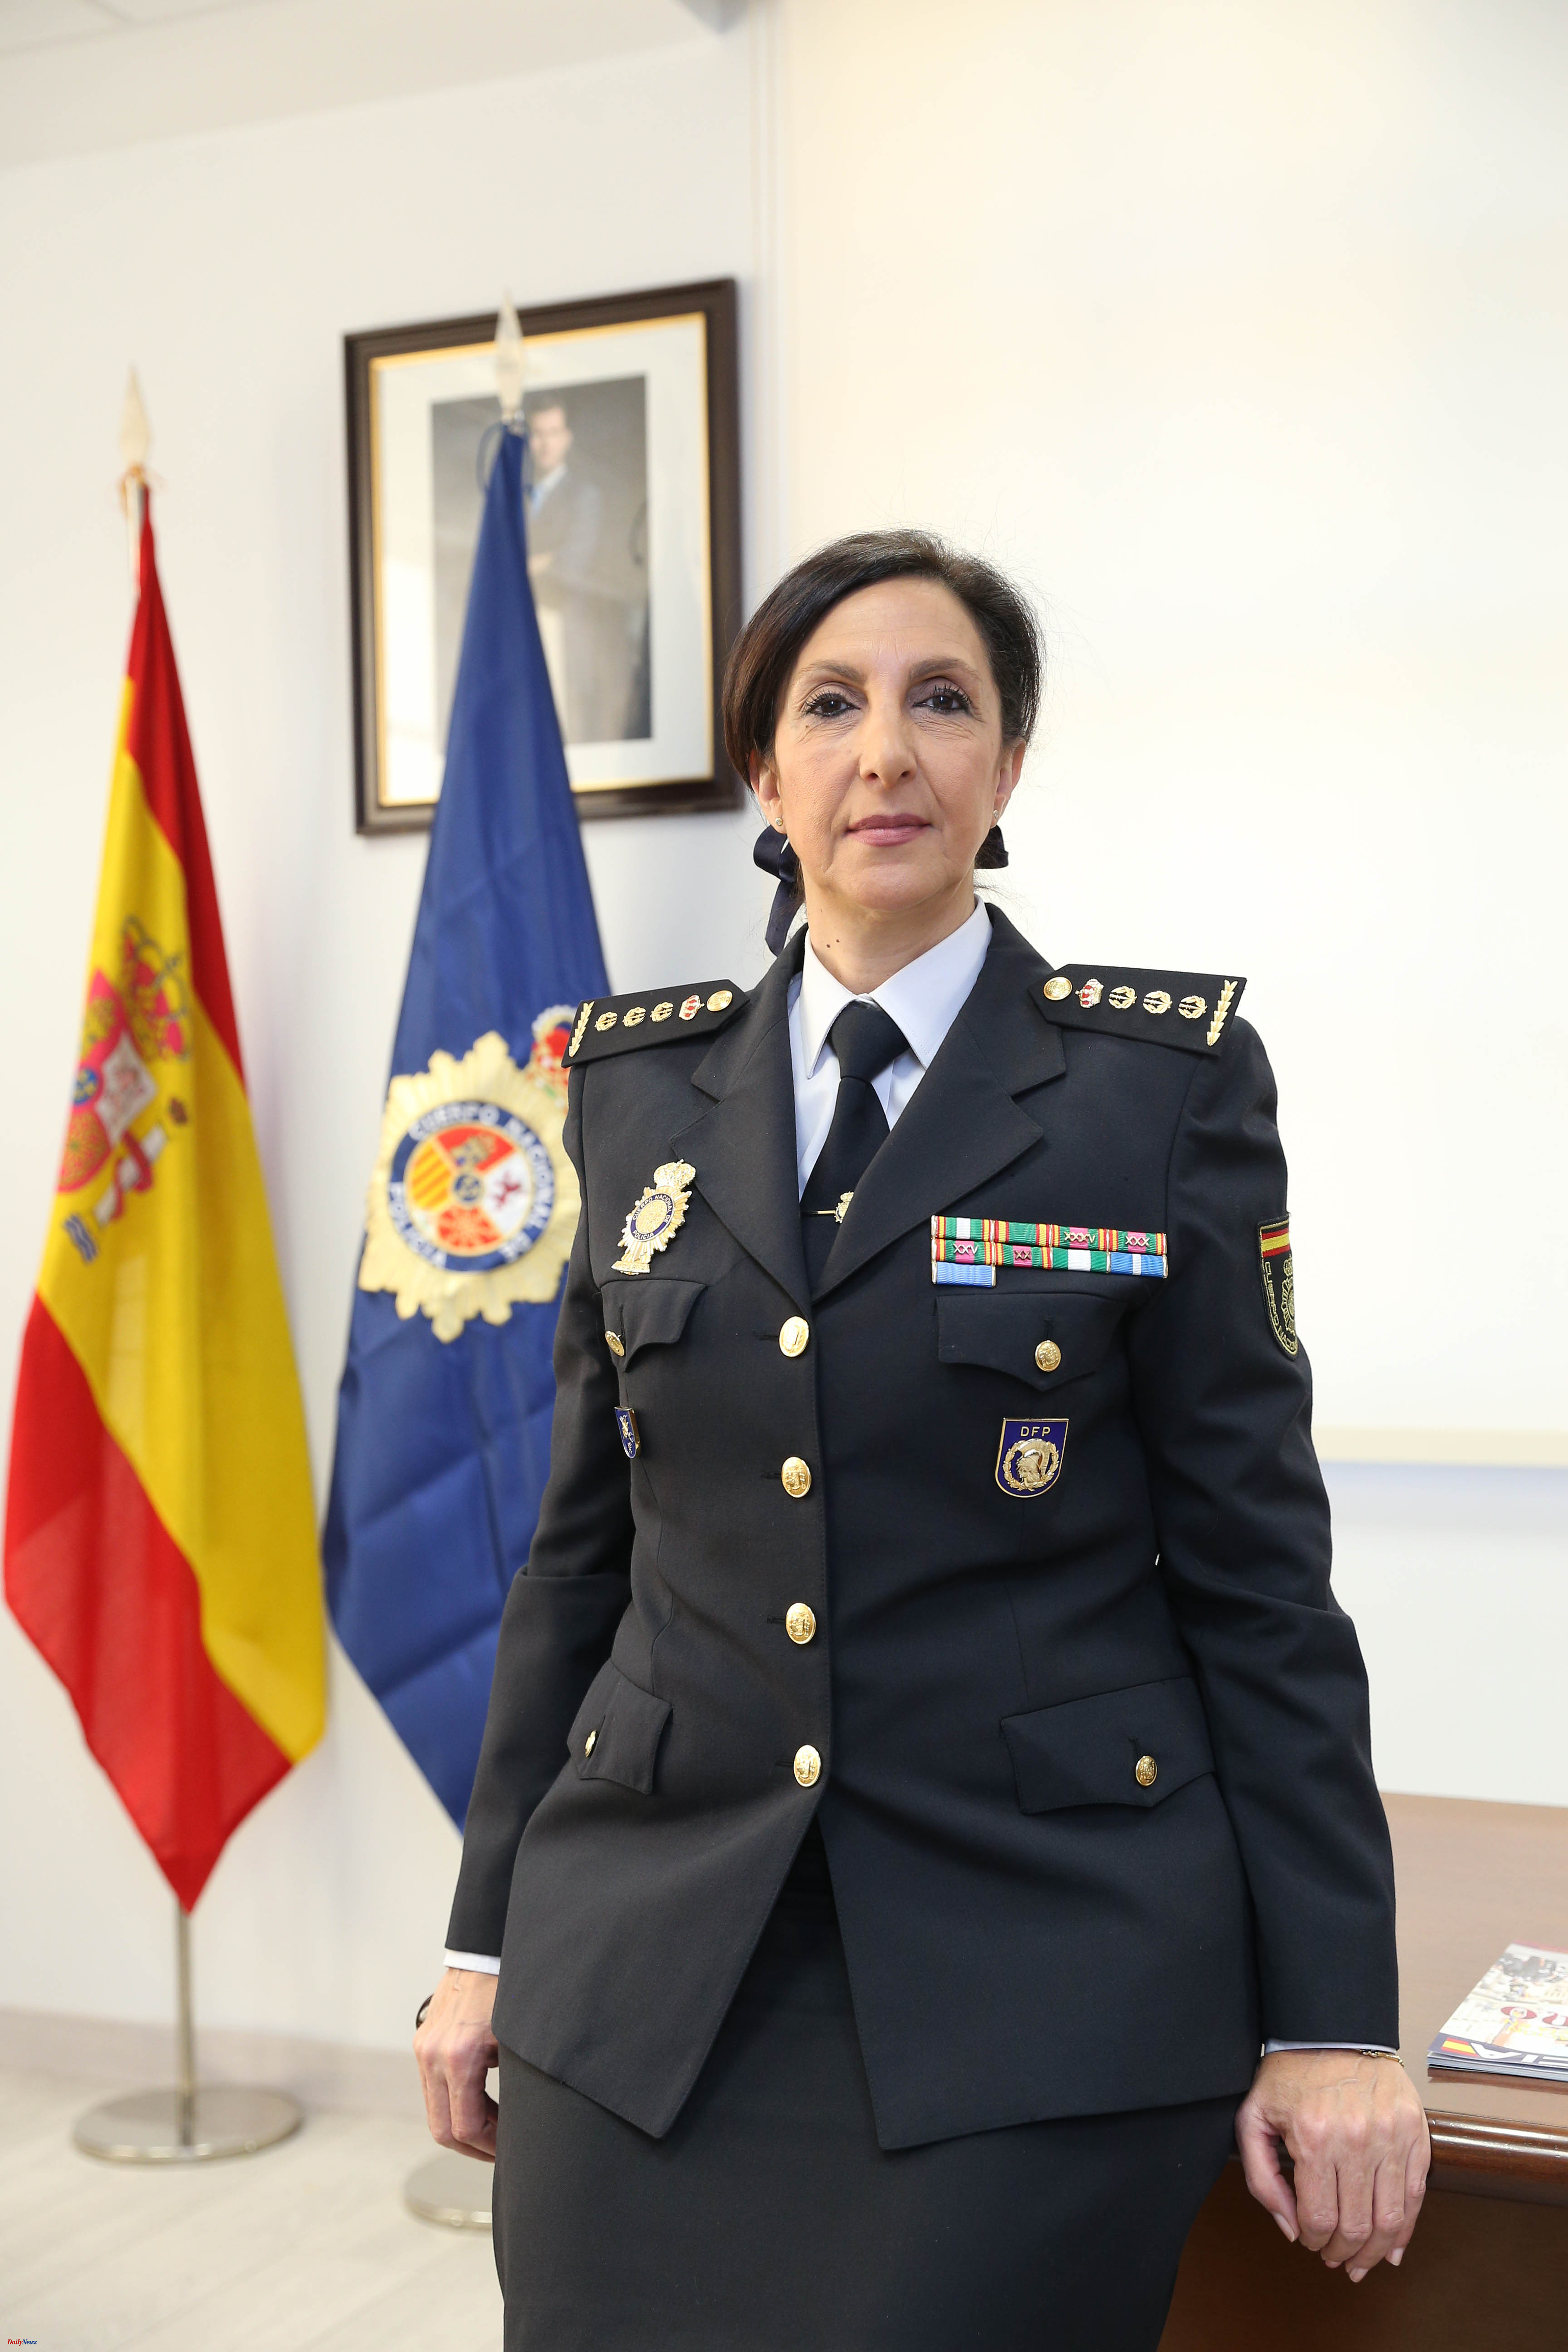 Interior Marlaska appoints for the first time a woman who comes from the basic scale as Senior Police Chief